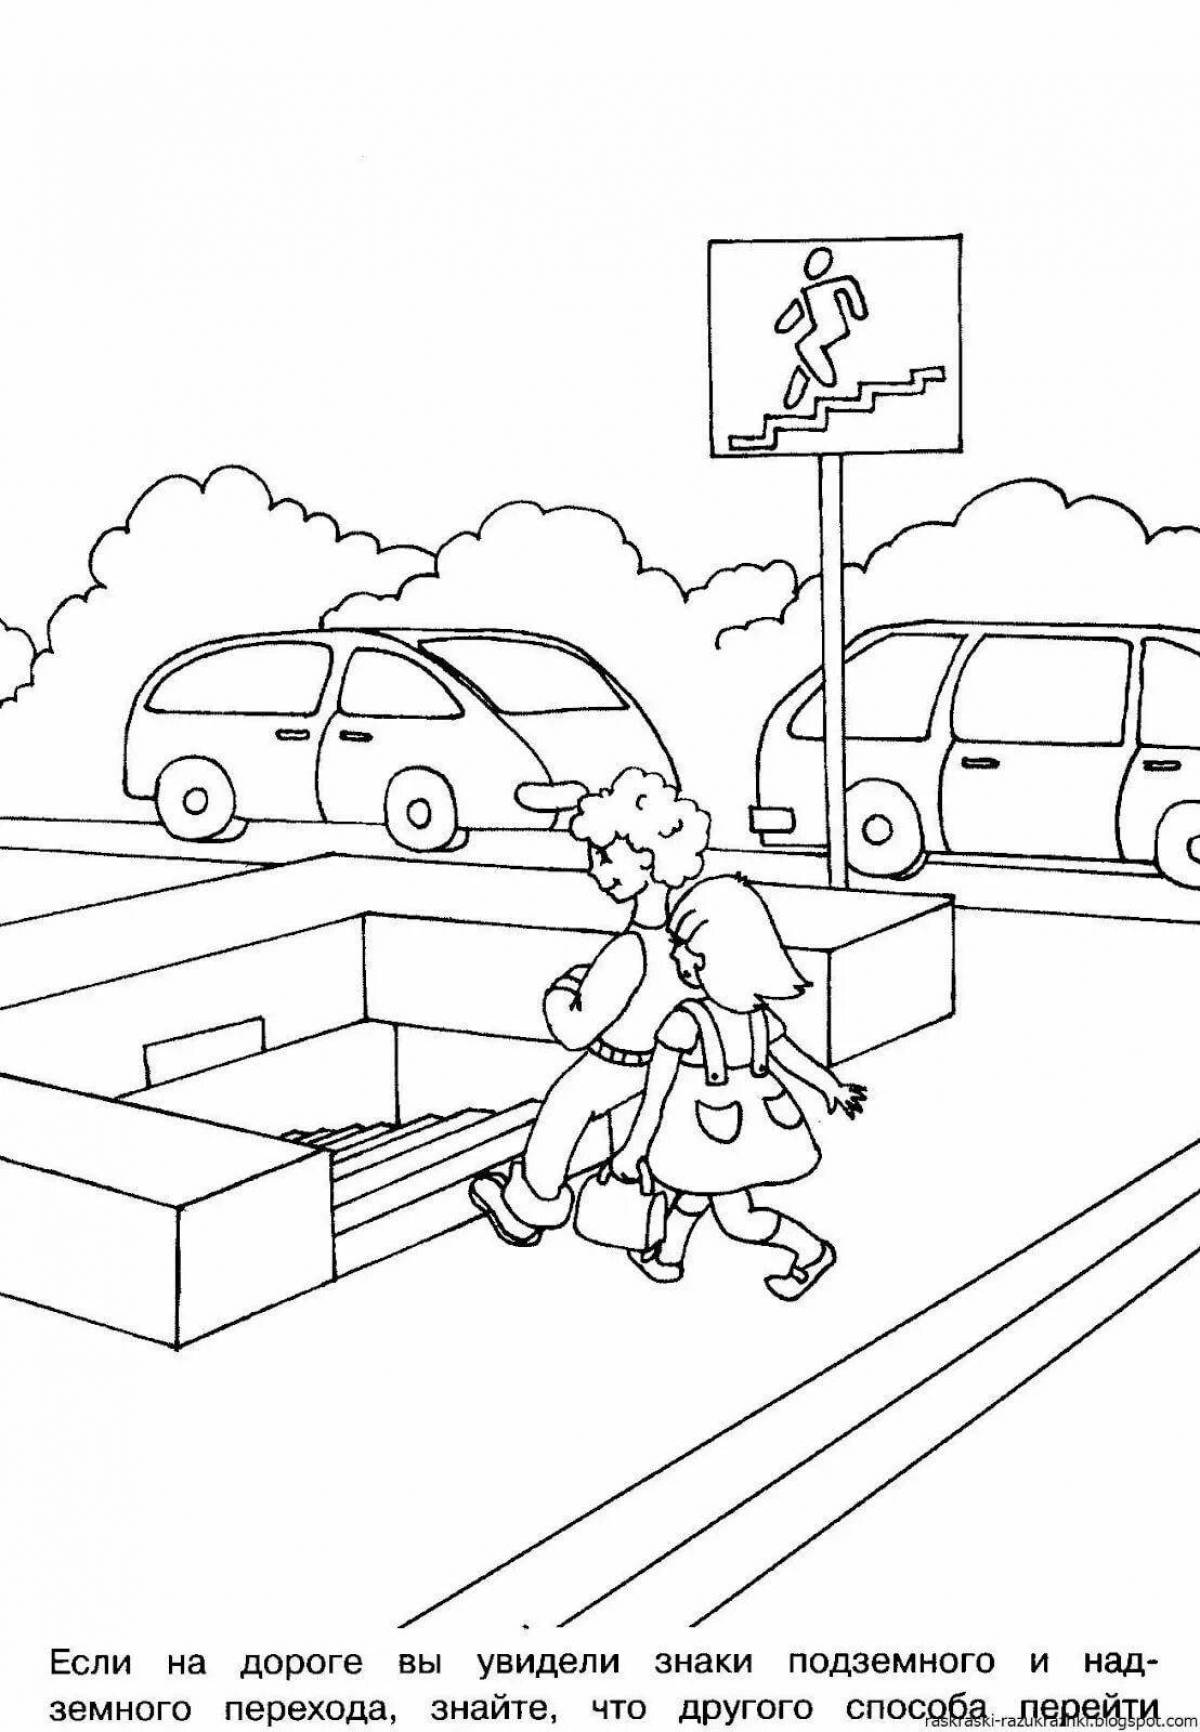 Pedestrian crossing with multicolored coloring pages for children aged 6-7